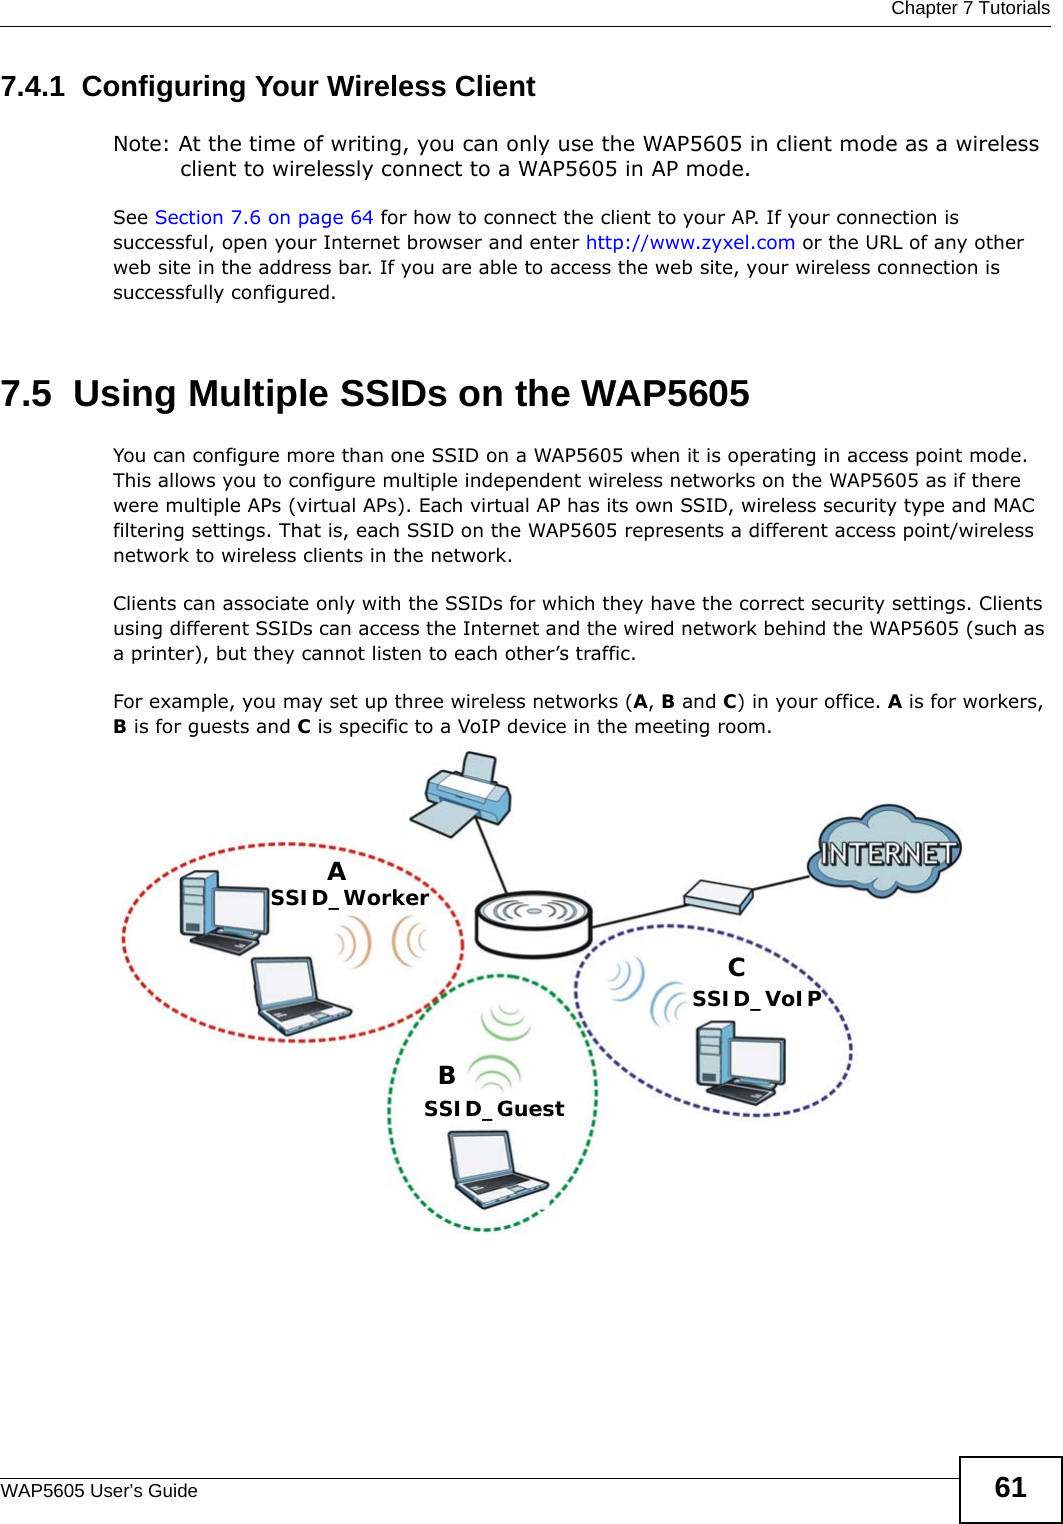  Chapter 7 TutorialsWAP5605 User’s Guide 617.4.1  Configuring Your Wireless ClientNote: At the time of writing, you can only use the WAP5605 in client mode as a wireless client to wirelessly connect to a WAP5605 in AP mode.See Section 7.6 on page 64 for how to connect the client to your AP. If your connection is successful, open your Internet browser and enter http://www.zyxel.com or the URL of any other web site in the address bar. If you are able to access the web site, your wireless connection is successfully configured.7.5  Using Multiple SSIDs on the WAP5605You can configure more than one SSID on a WAP5605 when it is operating in access point mode. This allows you to configure multiple independent wireless networks on the WAP5605 as if there were multiple APs (virtual APs). Each virtual AP has its own SSID, wireless security type and MAC filtering settings. That is, each SSID on the WAP5605 represents a different access point/wireless network to wireless clients in the network. Clients can associate only with the SSIDs for which they have the correct security settings. Clients using different SSIDs can access the Internet and the wired network behind the WAP5605 (such as a printer), but they cannot listen to each other’s traffic.For example, you may set up three wireless networks (A, B and C) in your office. A is for workers, B is for guests and C is specific to a VoIP device in the meeting room.  ABCSSID_GuestSSID_WorkerSSID_VoIP